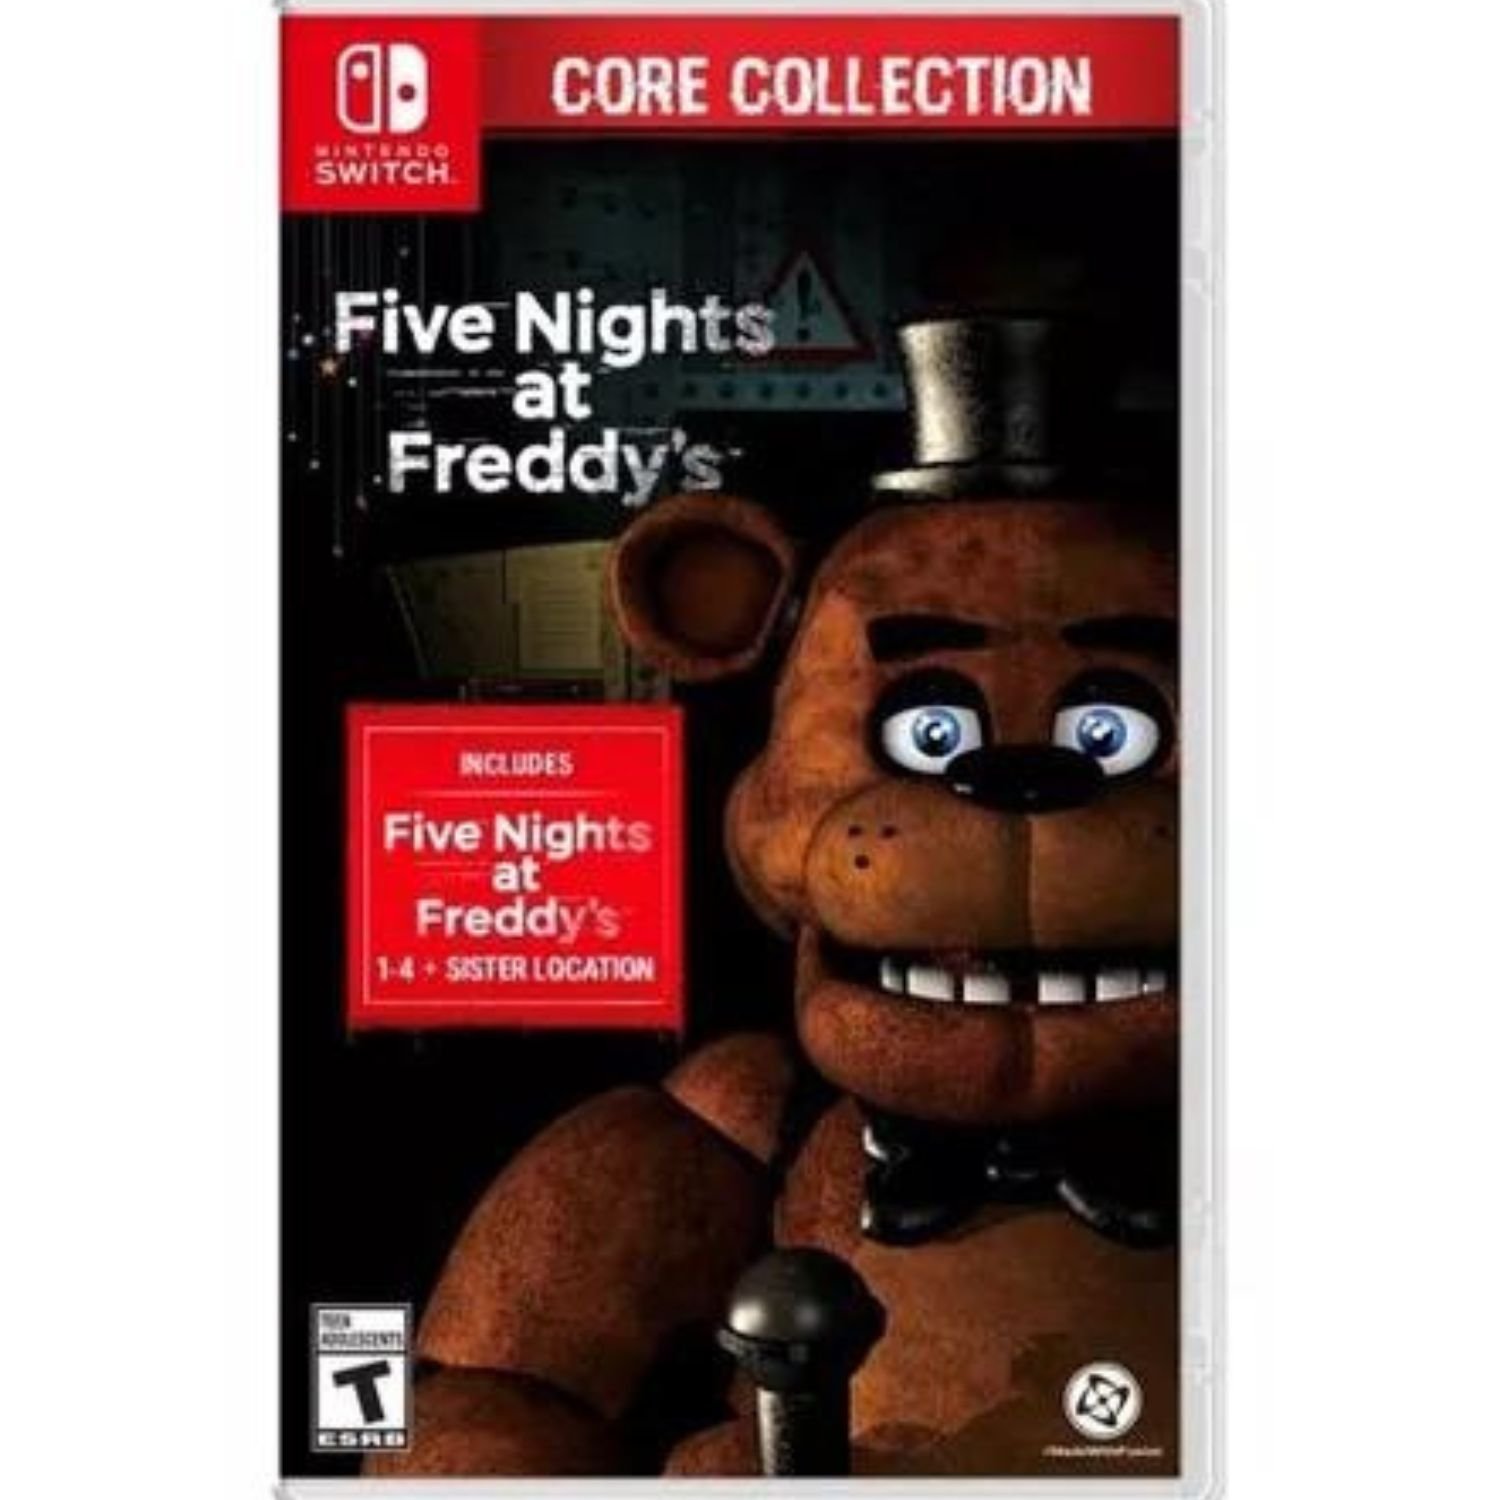 Five Nights At Freddy’s Core Collection – Nintendo Switch